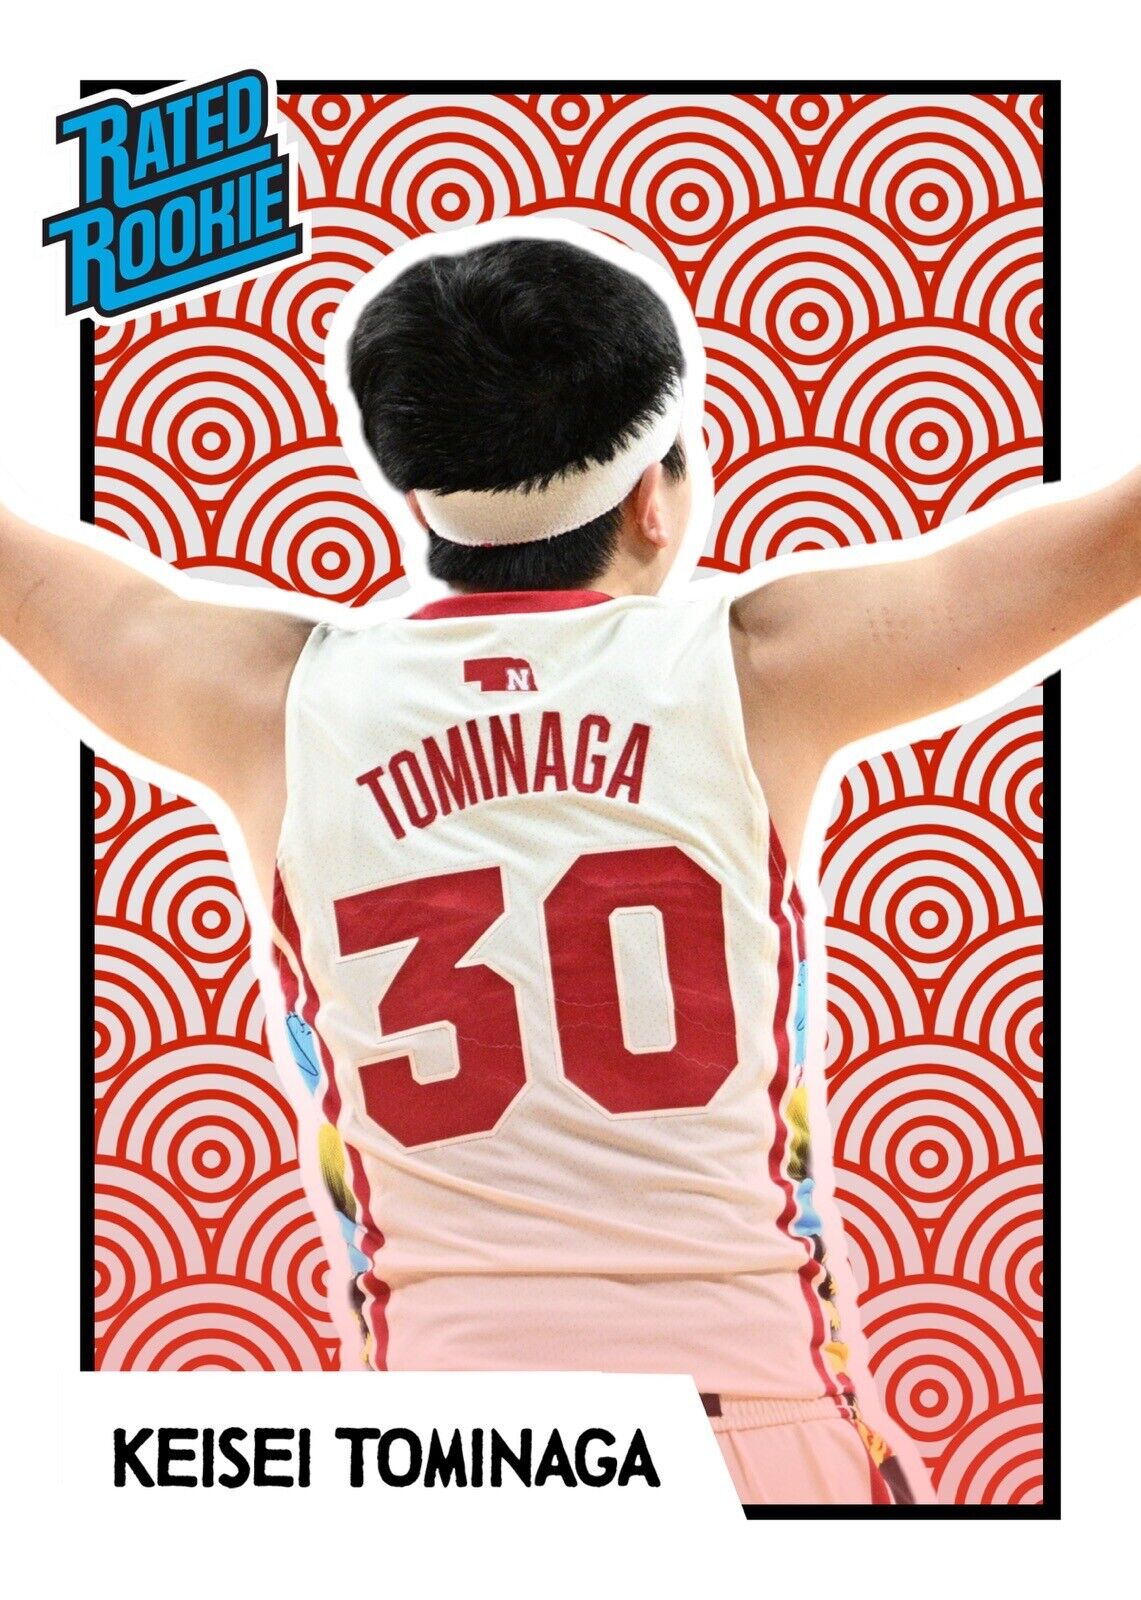 Keisei Tominaga Custom Trading Card By MPRINTS /9 (Only 9 Printed)